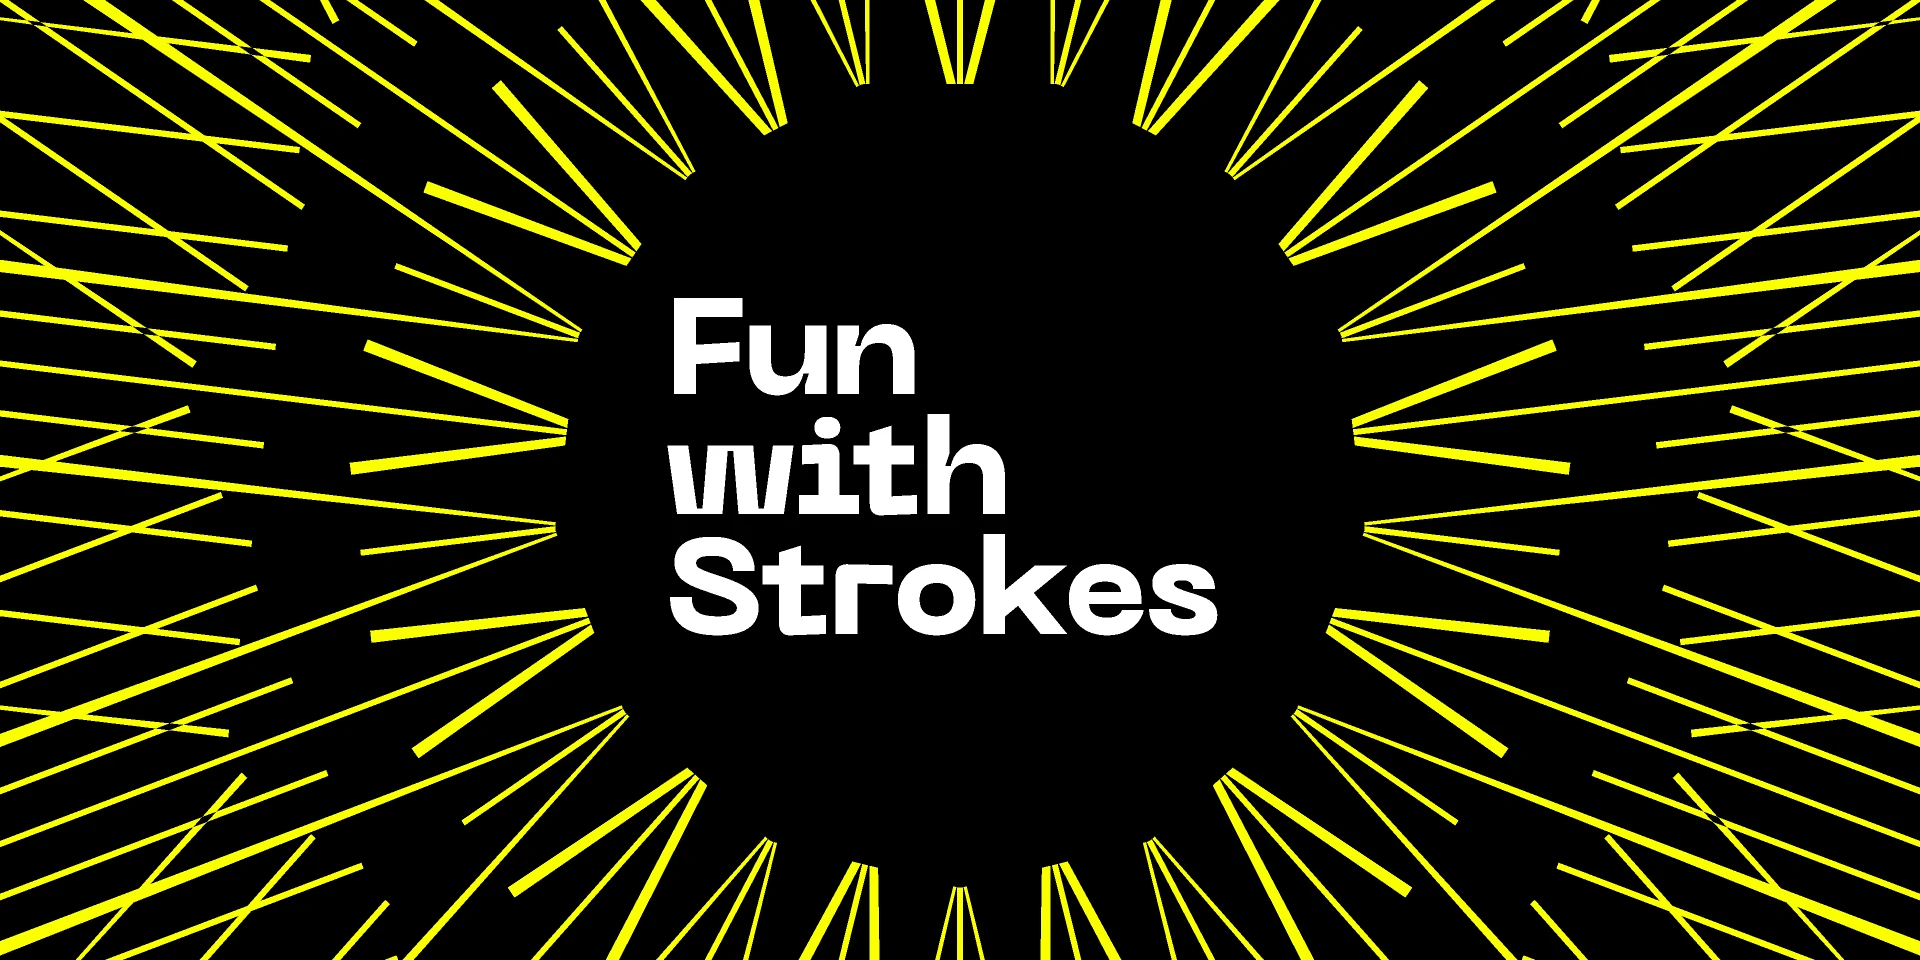 Fun with Strokes for Figma and Adobe XD